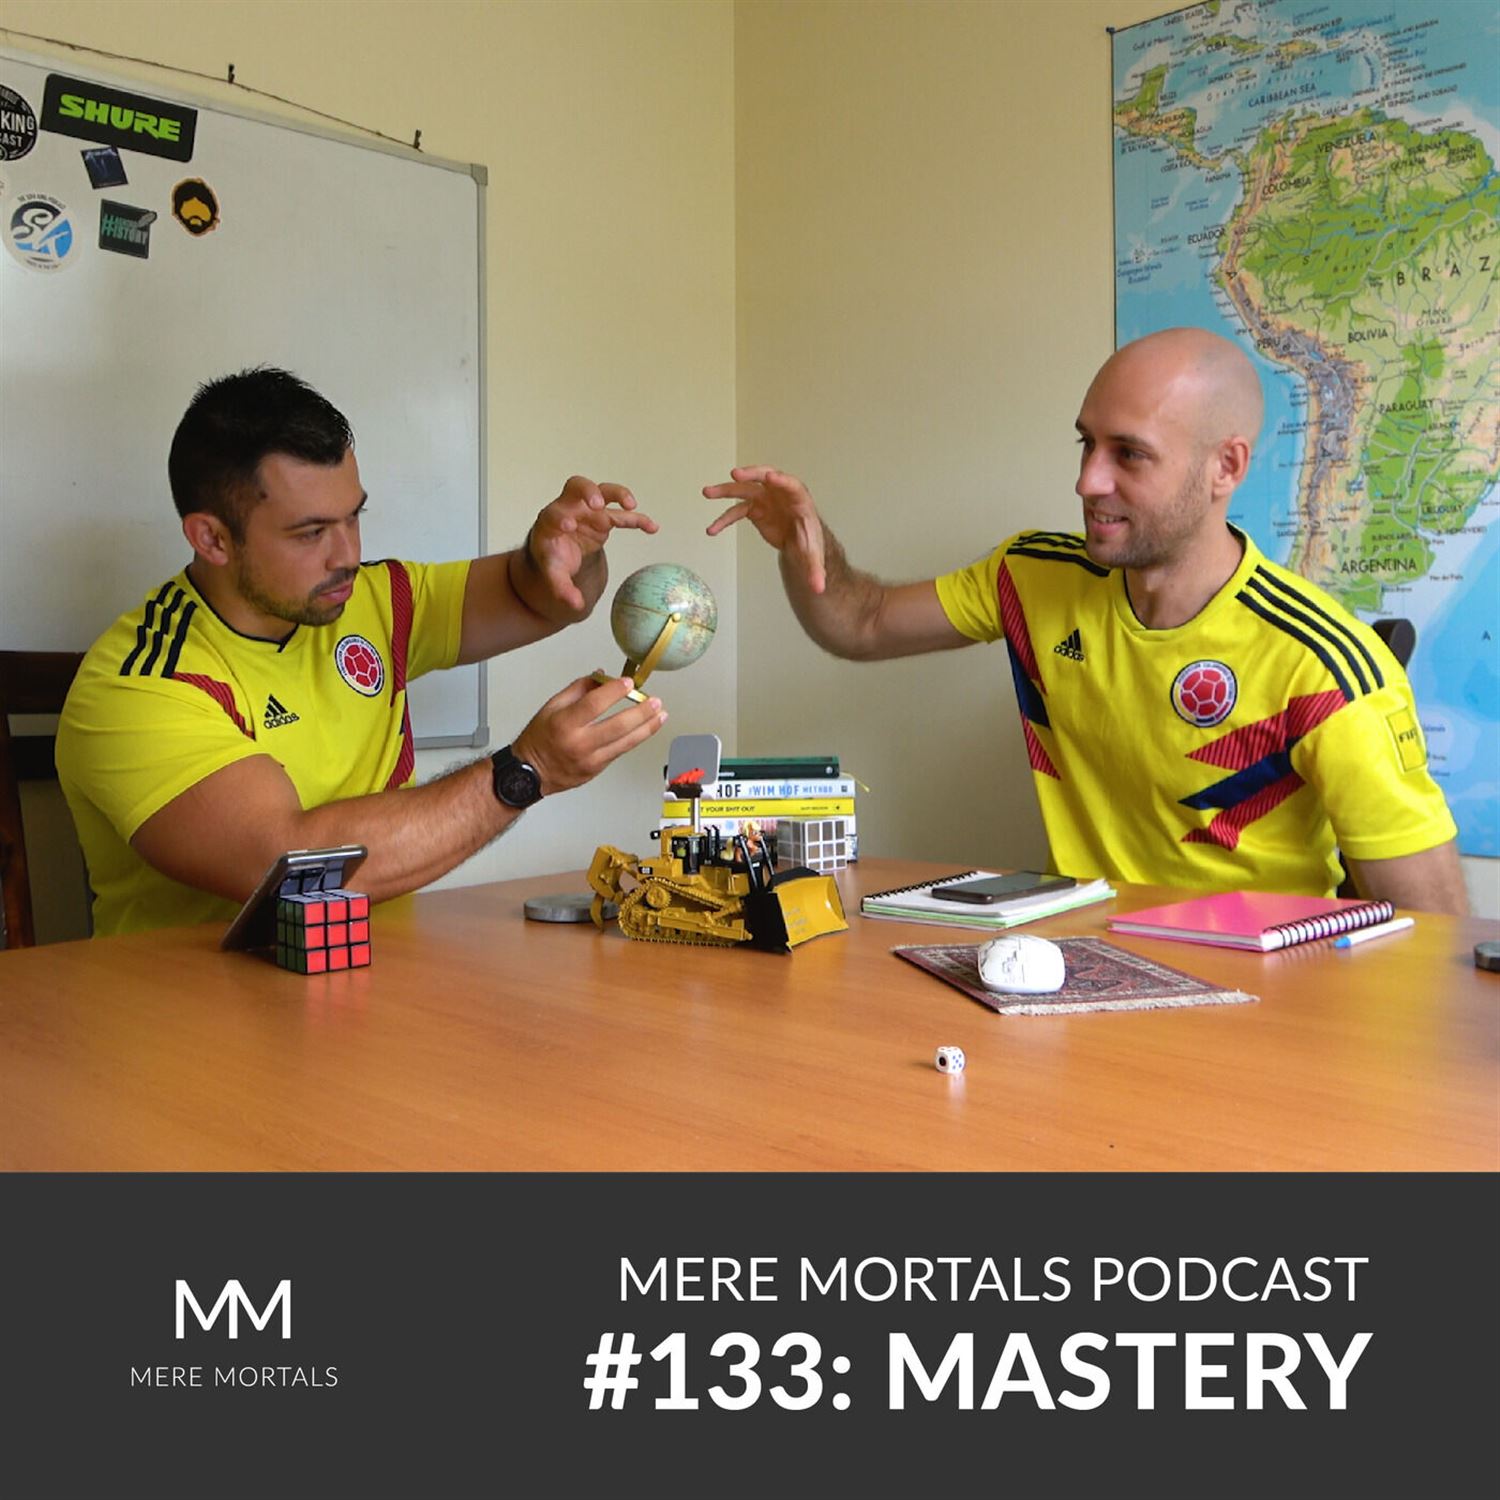 10,000 Hours To Become A Master (Episode #133 - Mastery)